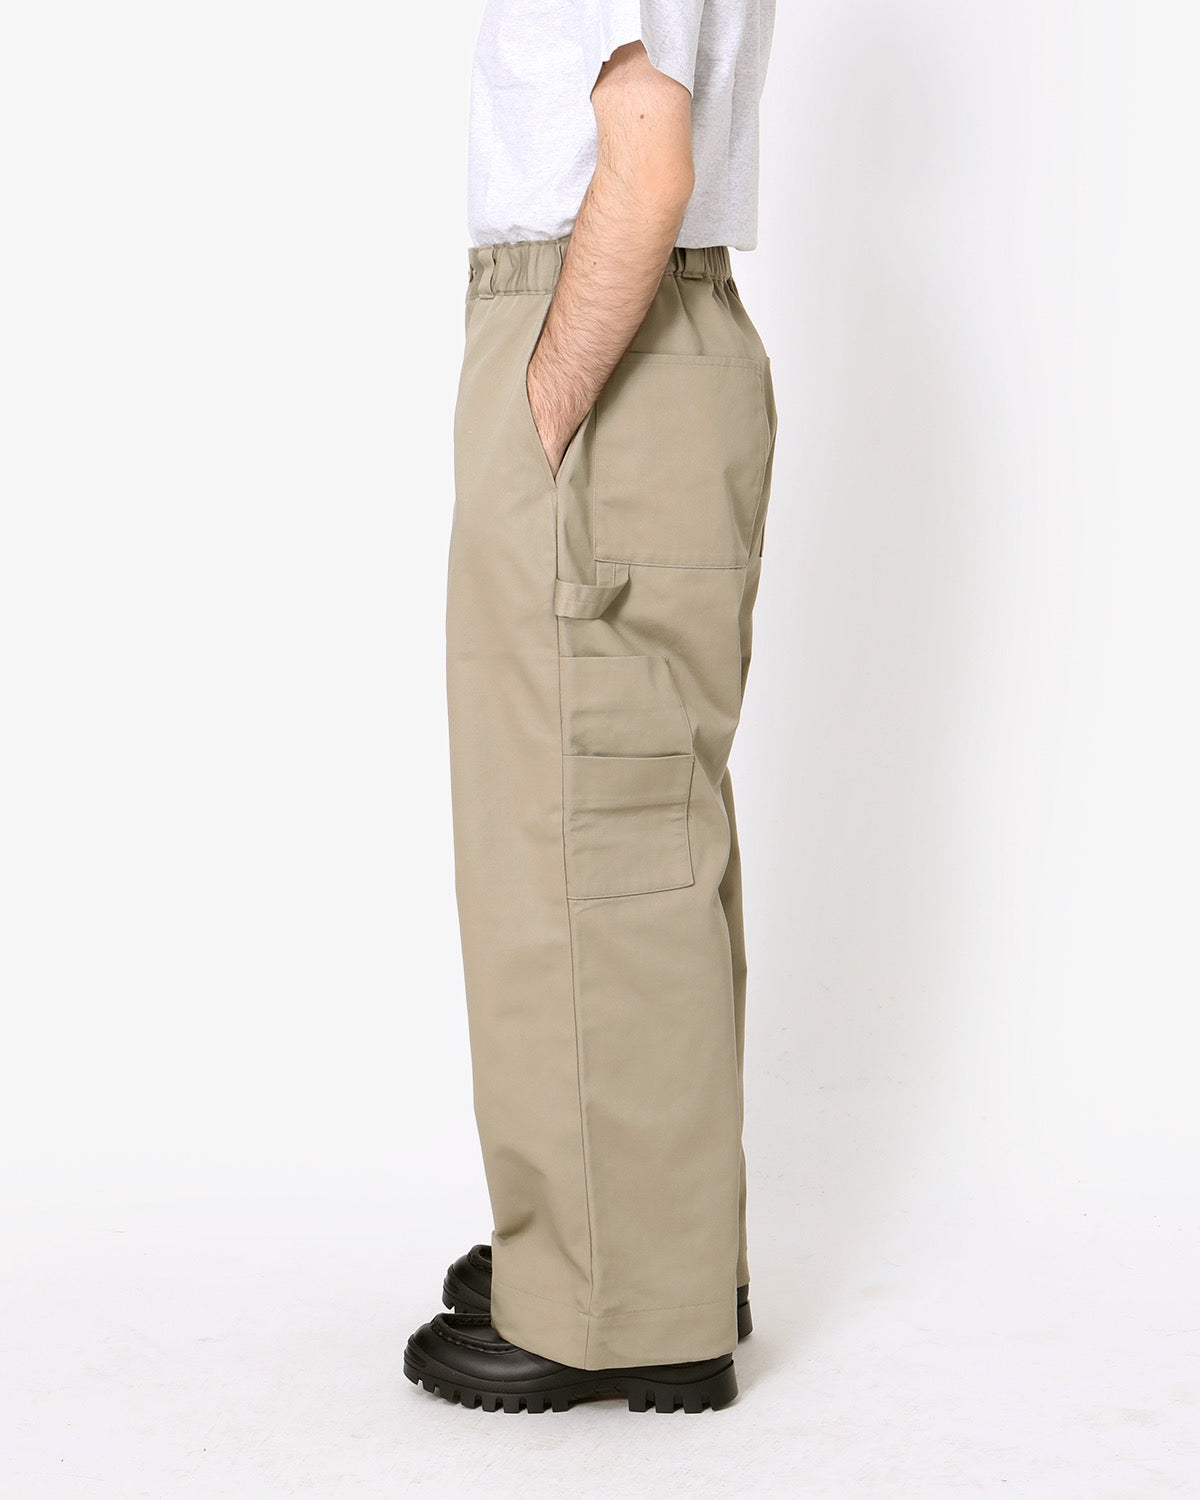 N.HOOLYWOOD COMPILE x Dickies PAINTER PANTS – COVERCHORD